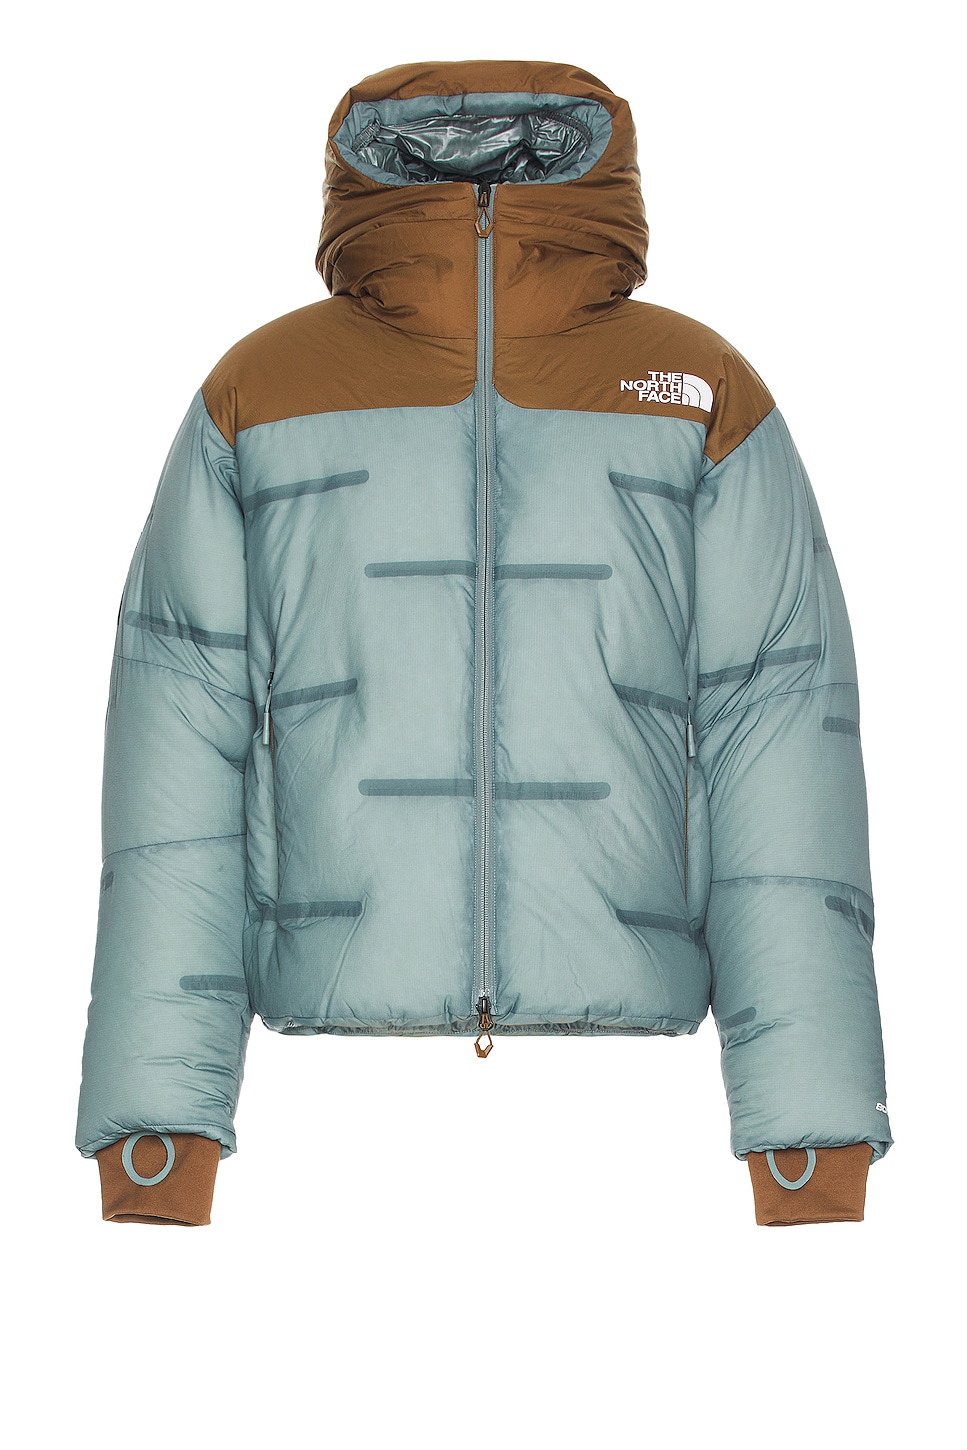 Image 1 of The North Face X Project U Cloud Down Nuptse Jacket in Concrete Grey & Sepia Brown